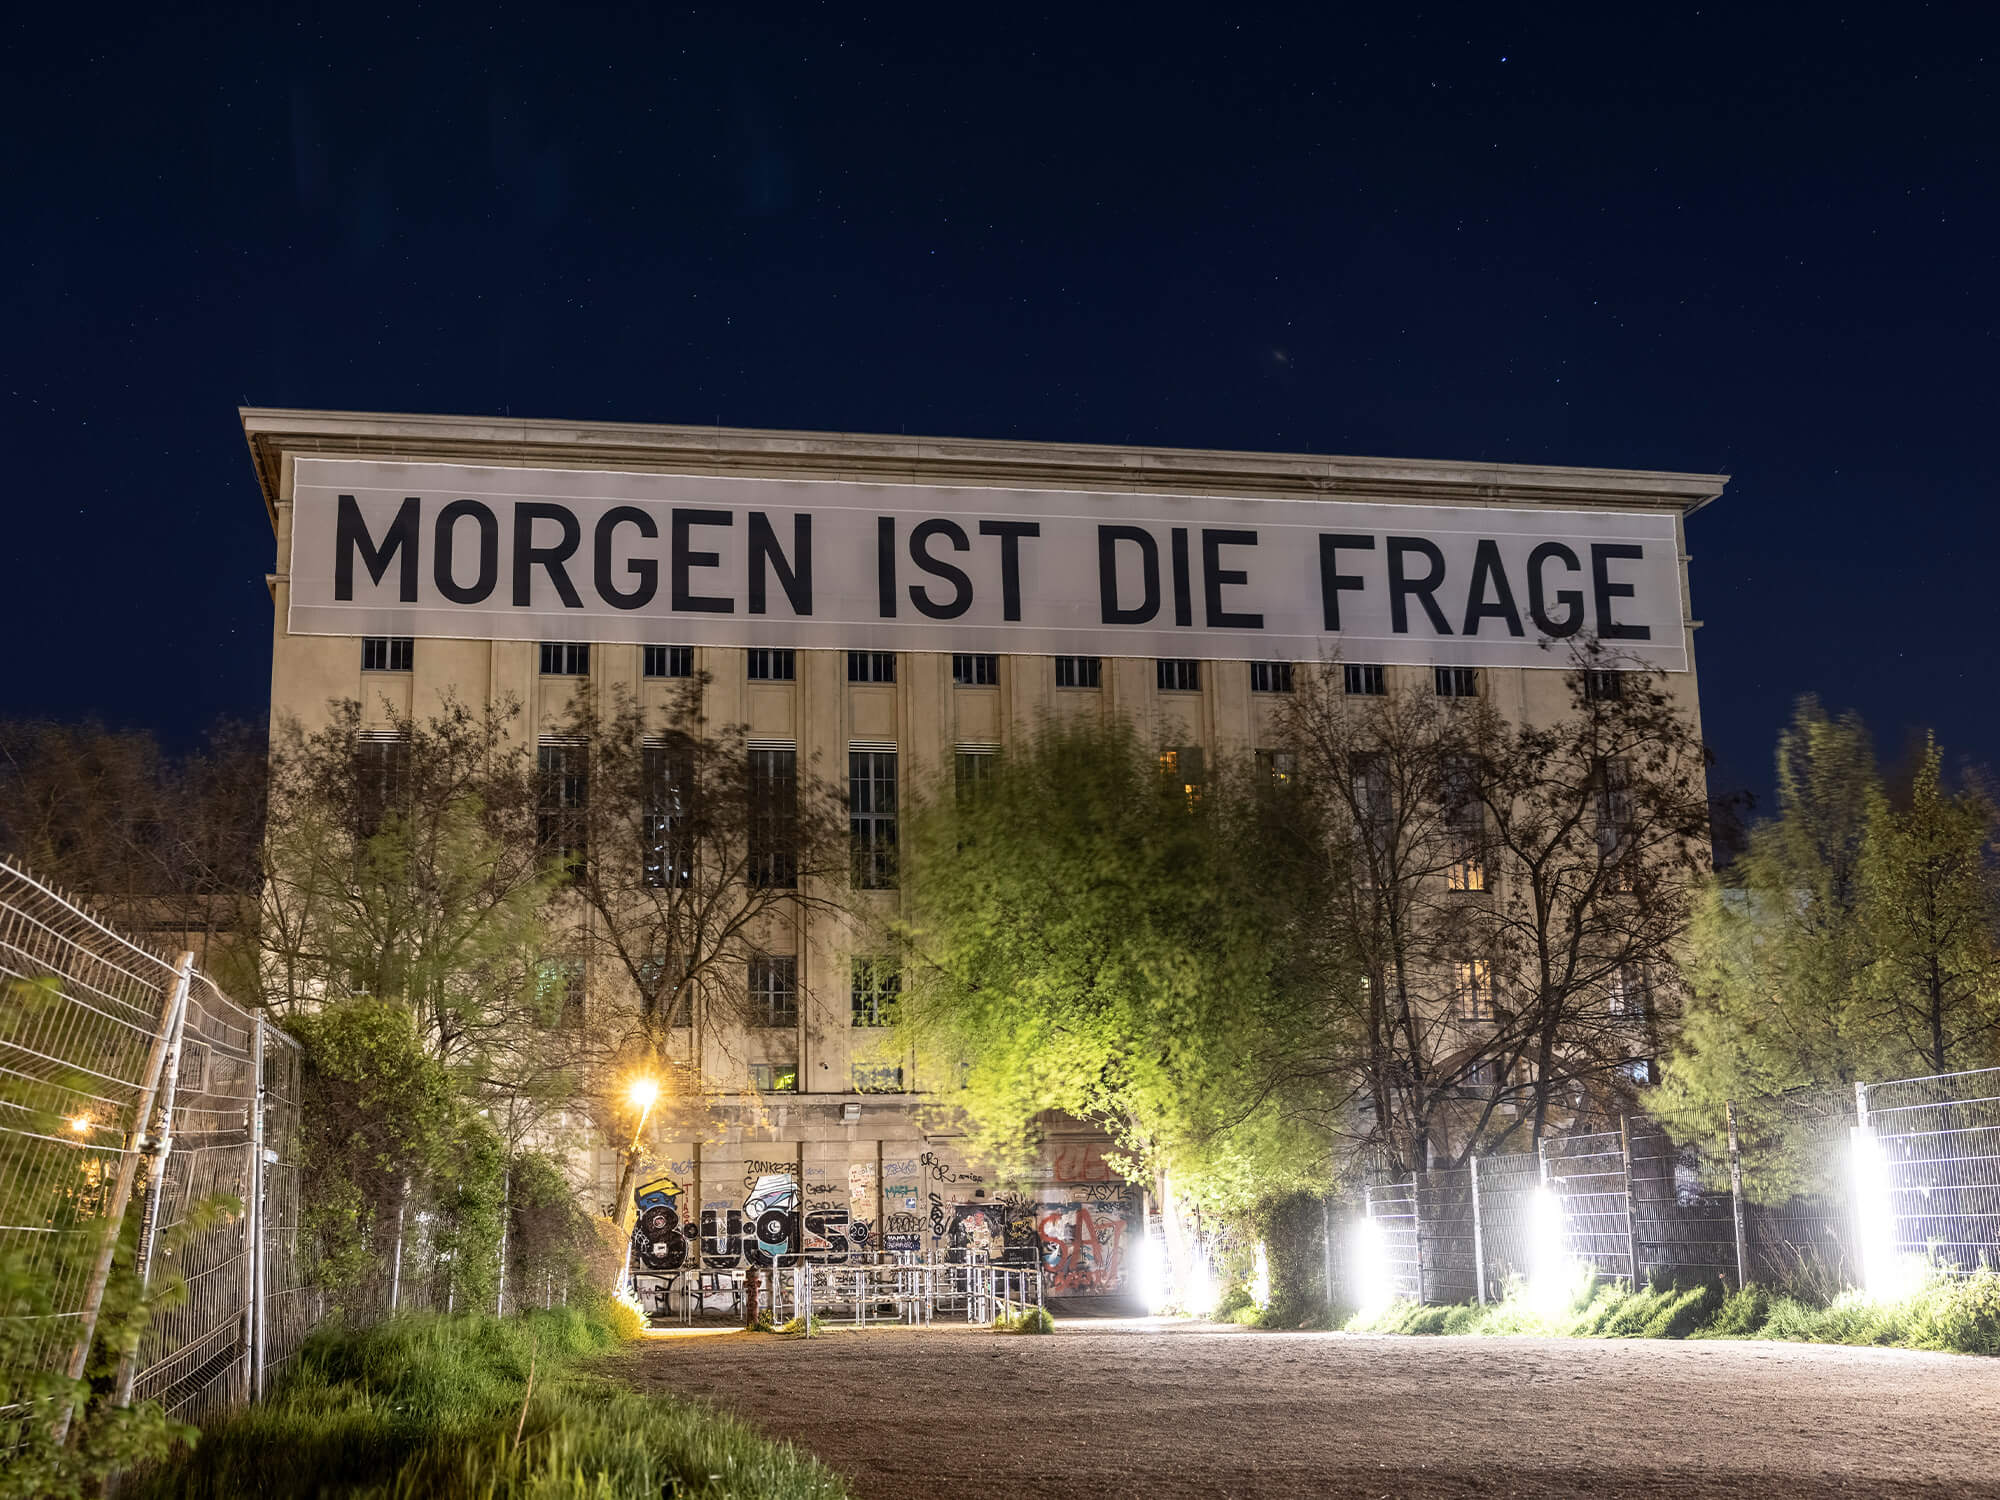 View from outside the Berghain venue. It's a tall, square building with "Morgen ist die frage" written on it in black letters.